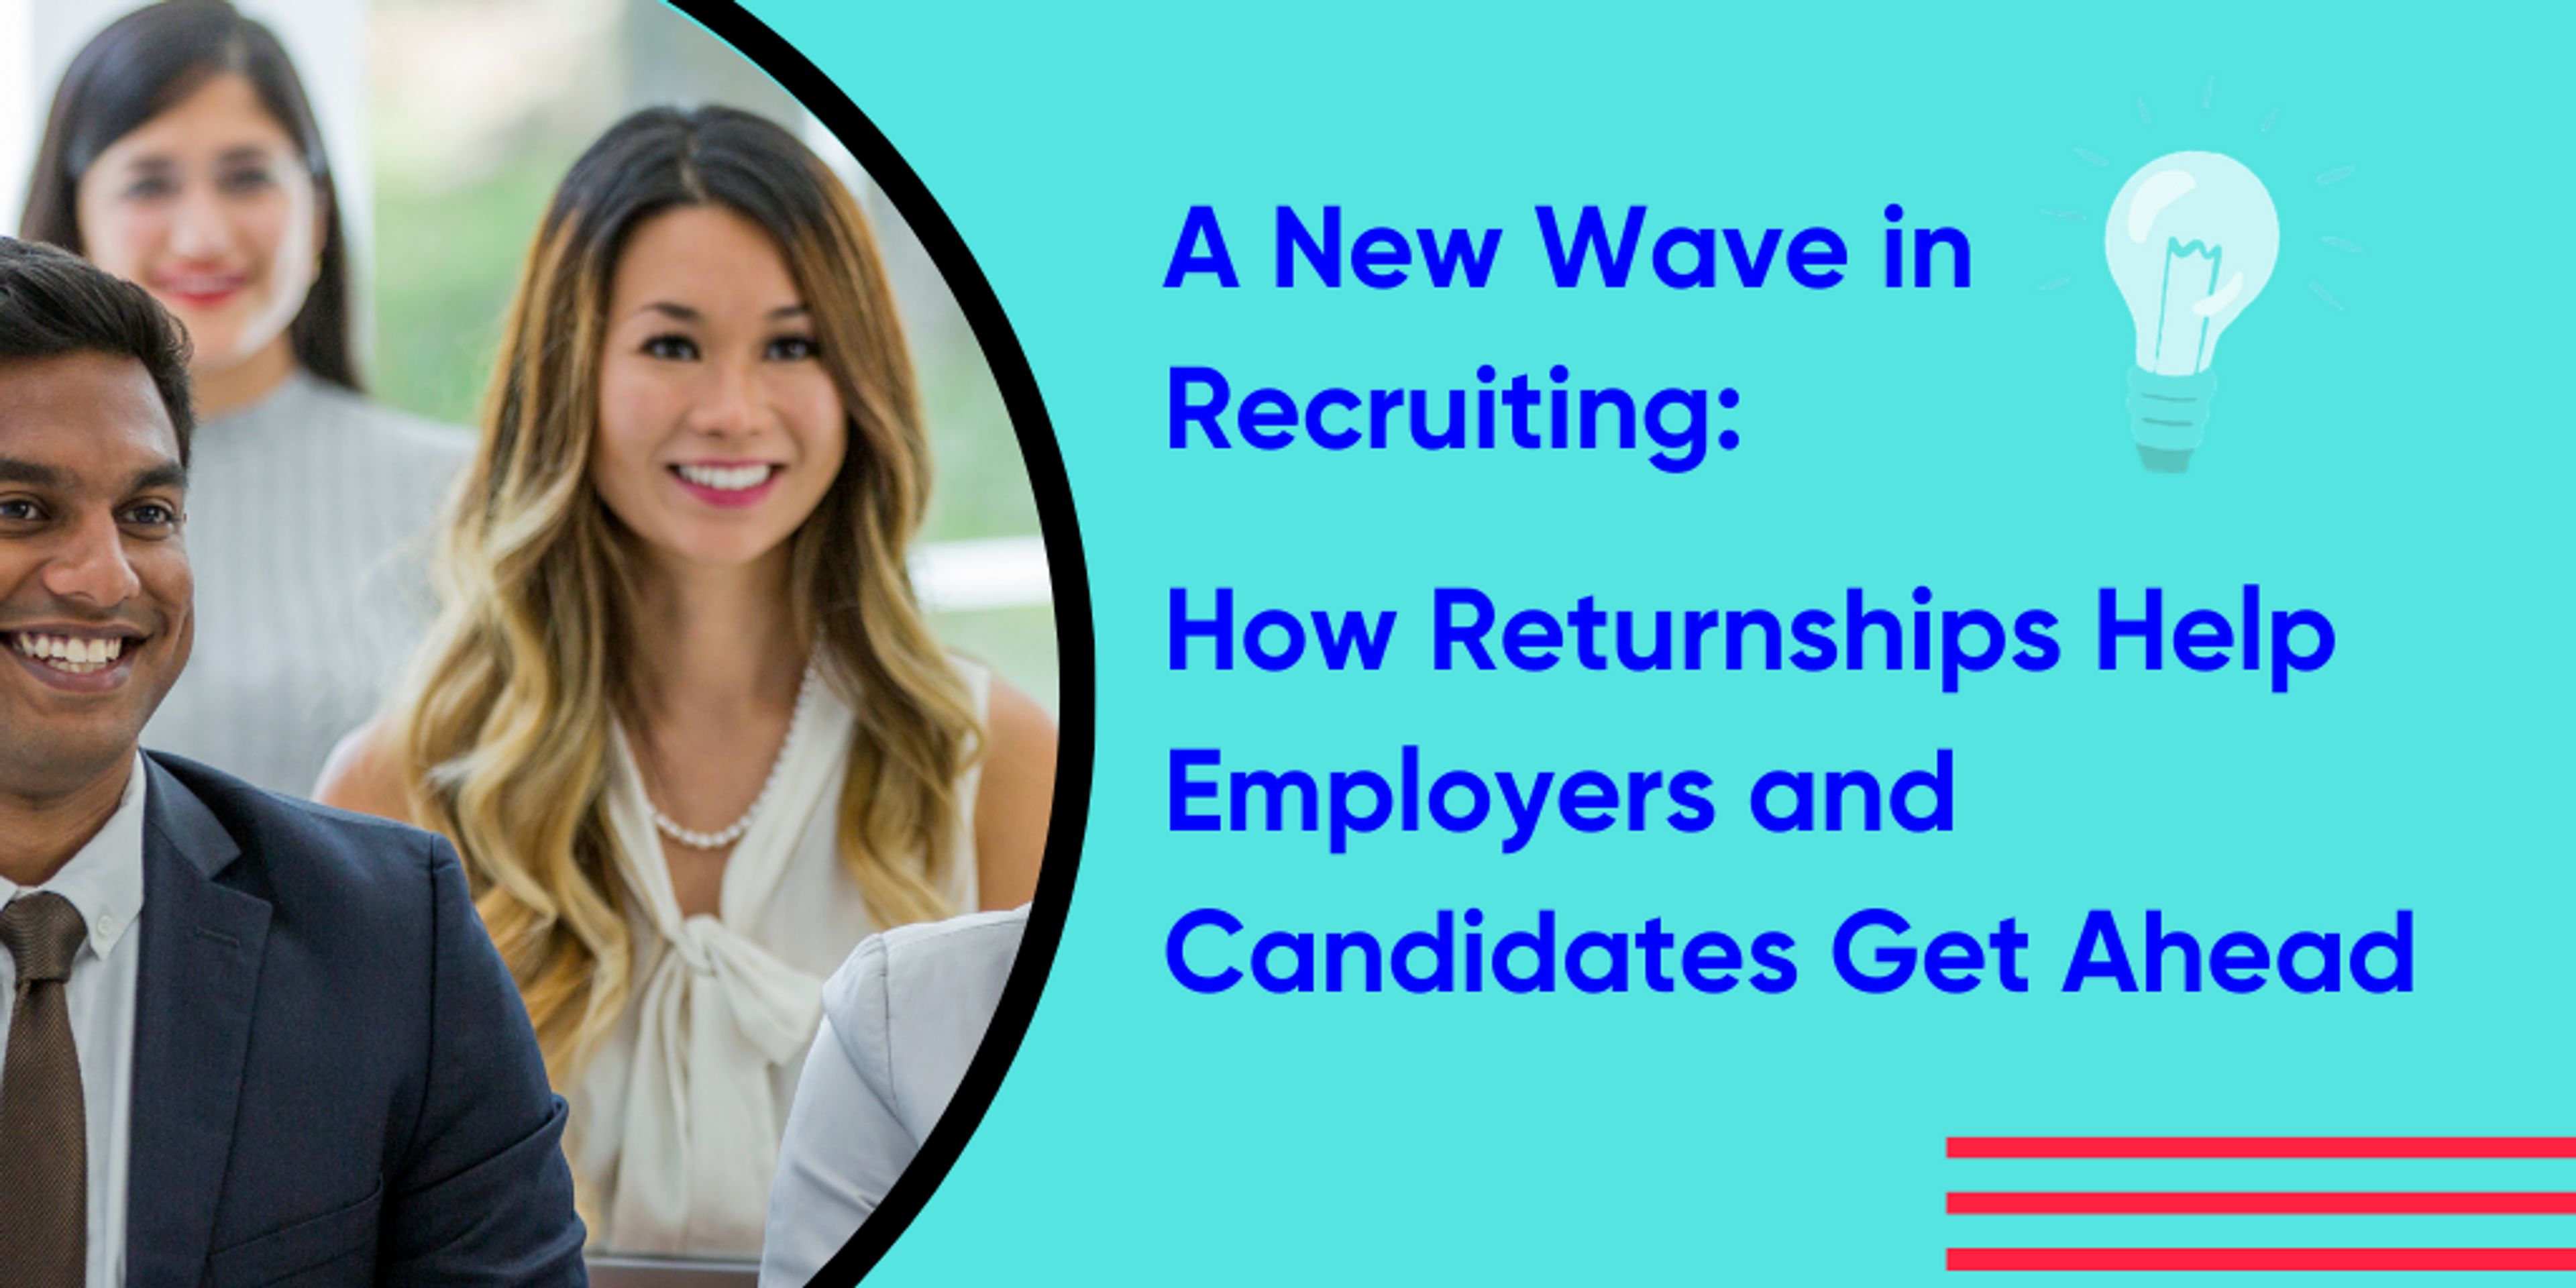 image of people smiling with text that reads "A New Wave in Recruiting: How Returnships Help Employers and Candidate Get Ahead"